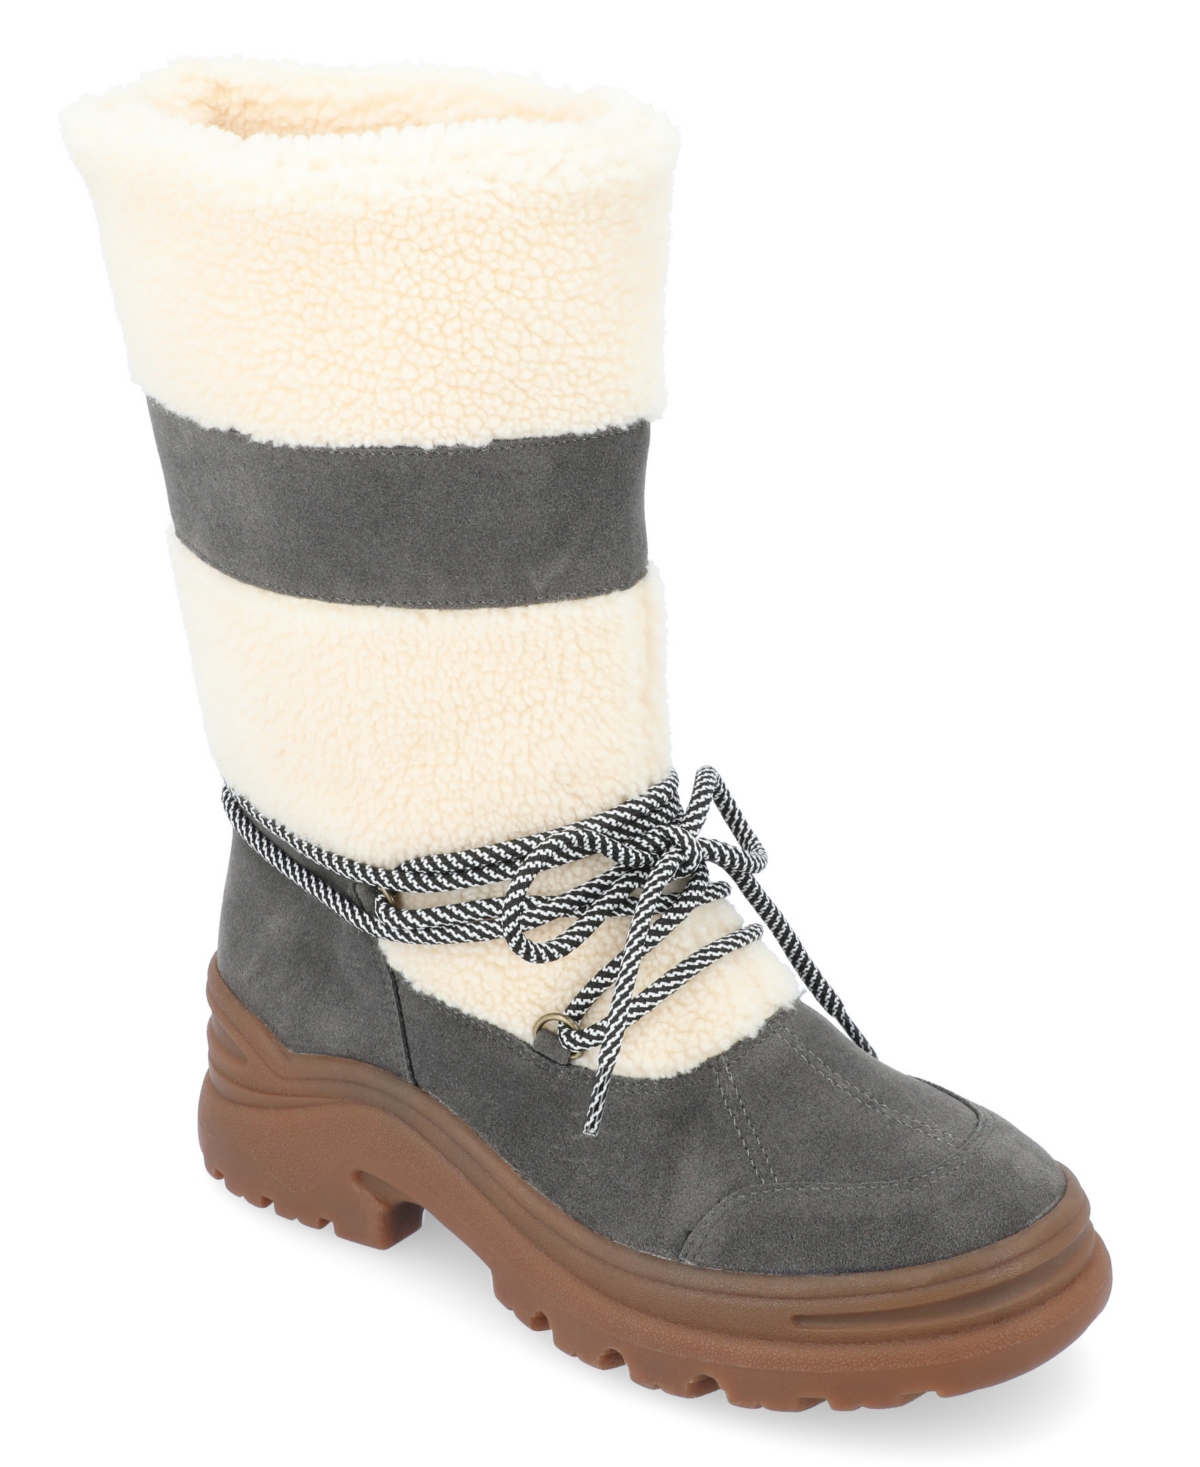 Journee Collection Women's Galina Winter Boots In Charcoal